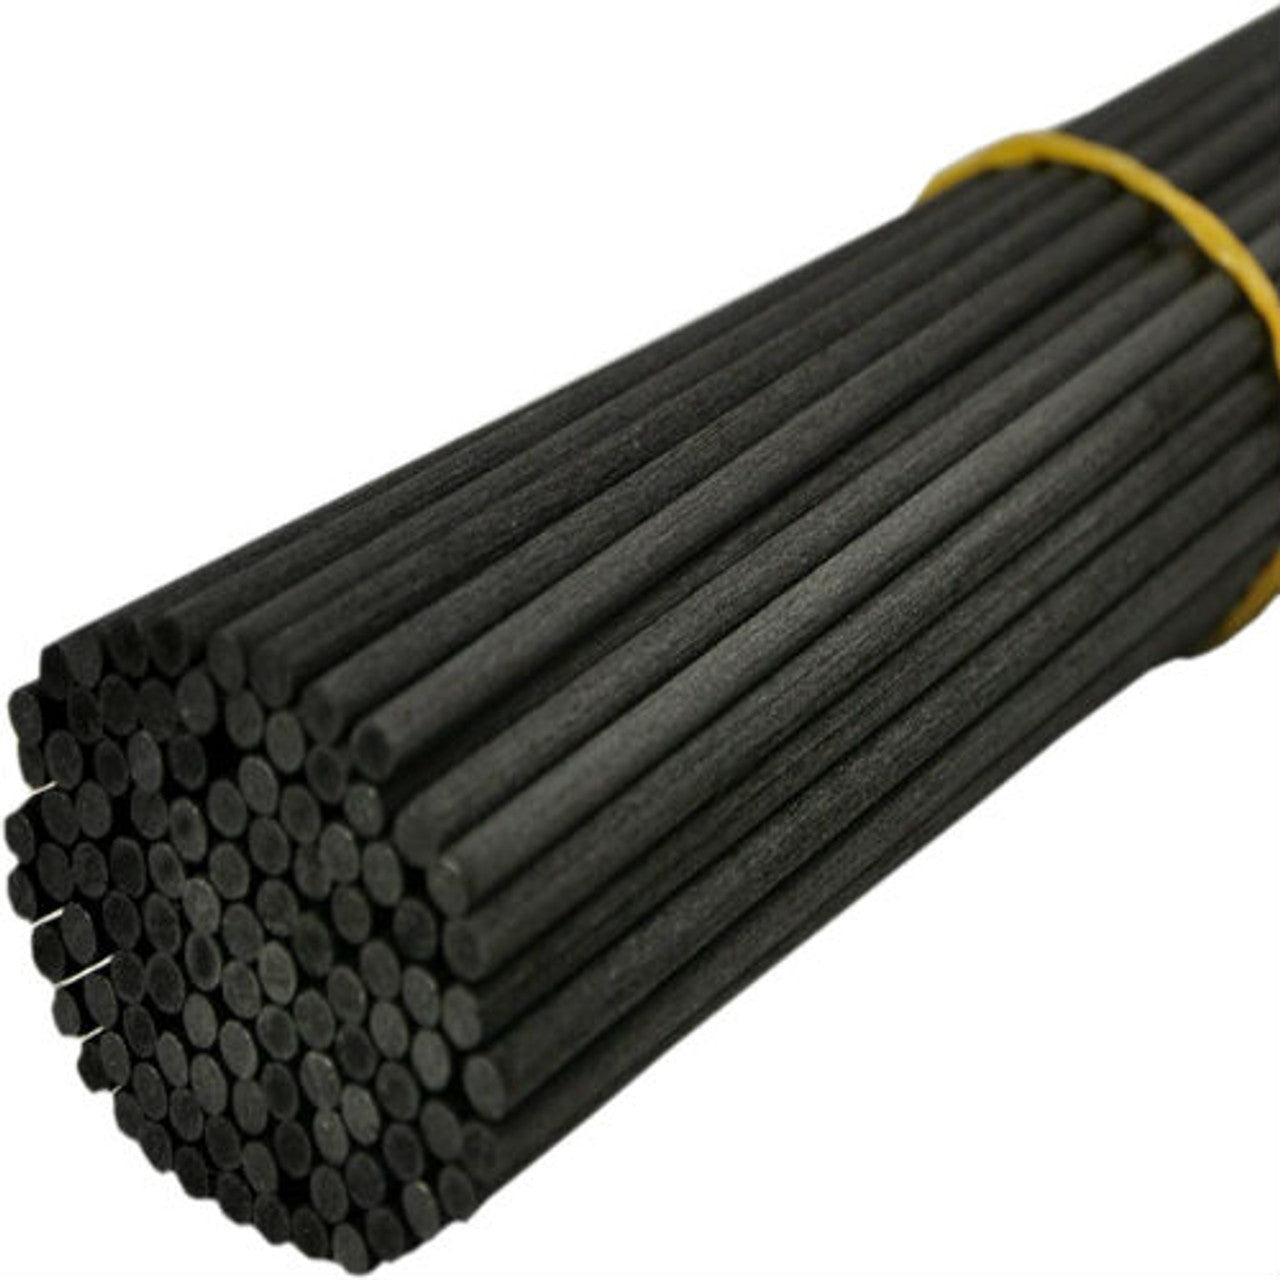 Black Fibre Reeds 3mm x 175mm (Recommended for 50ml Diffuser Bottle)